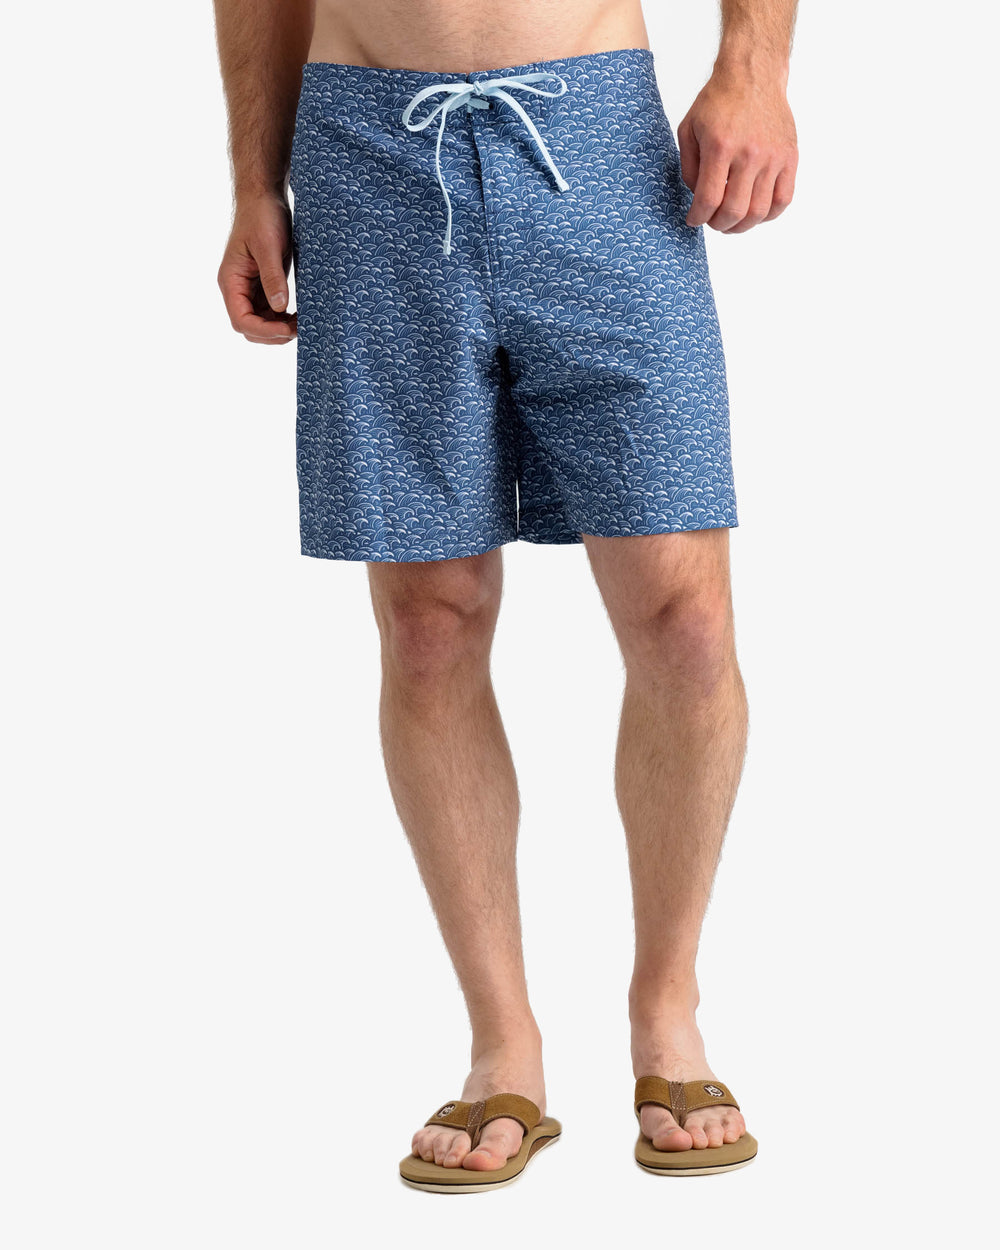 The front view of the Southern Tide Araby Cove Swim Short by Southern Tide - Aged Denim